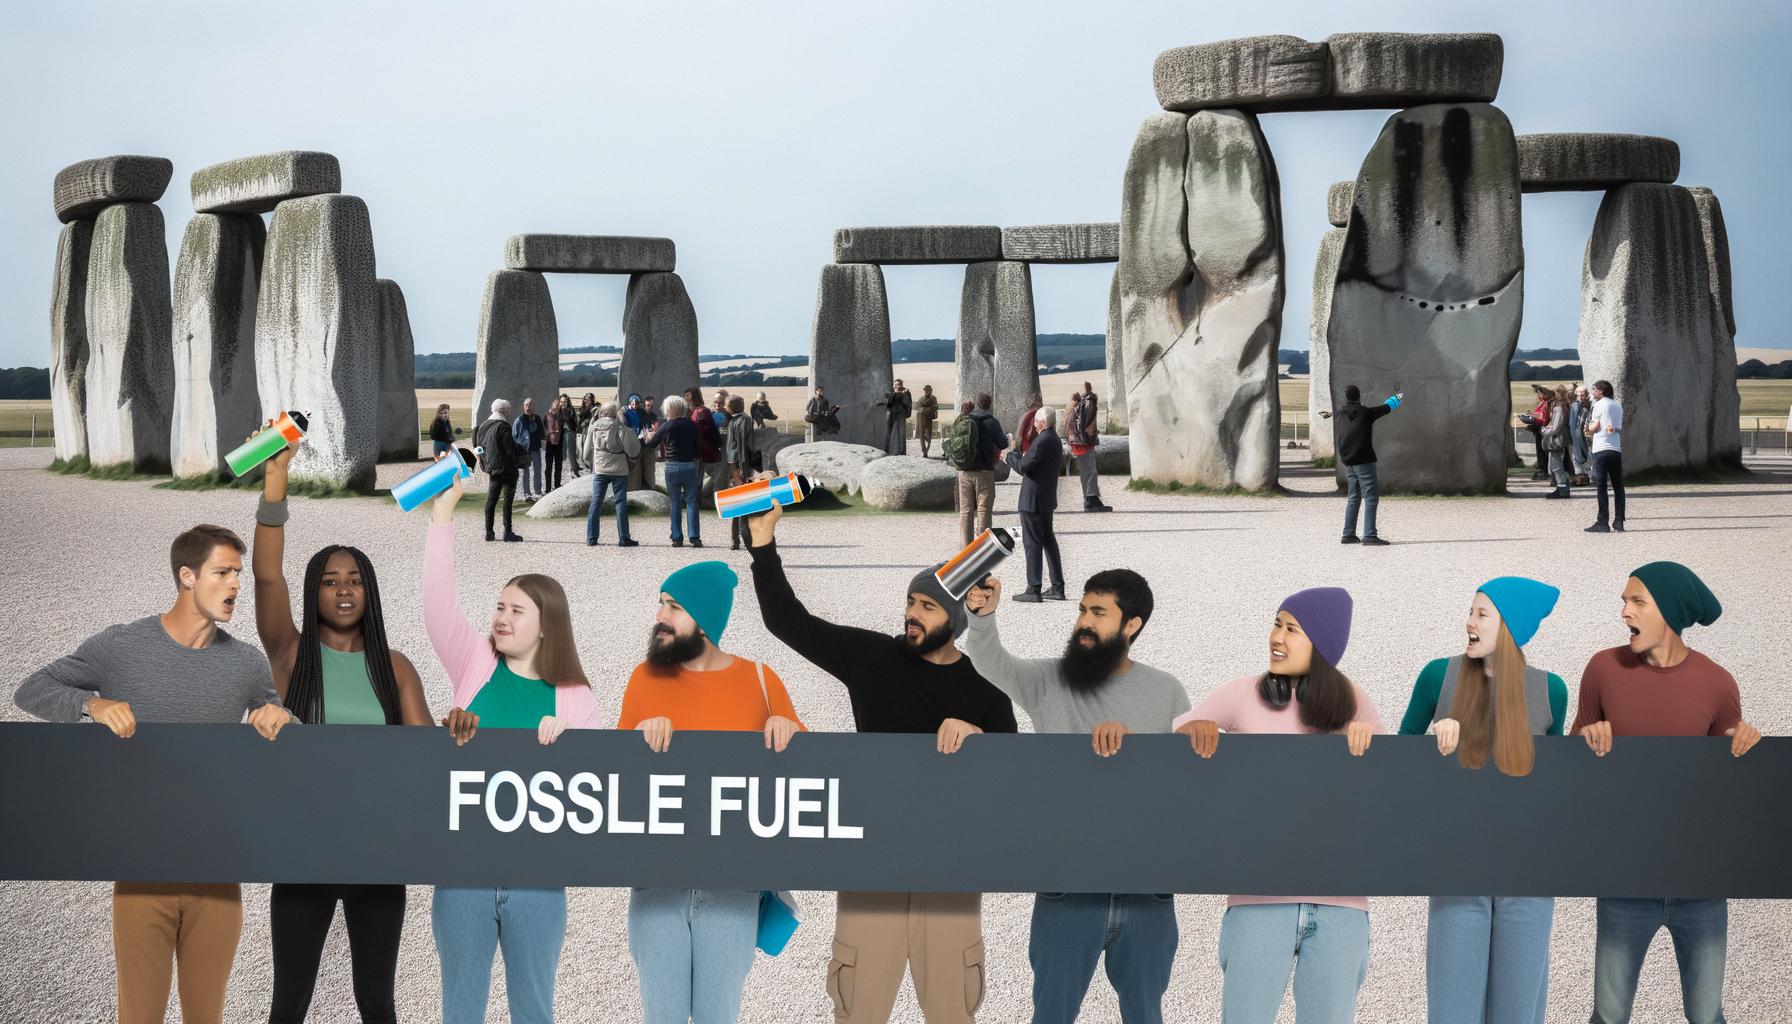 Activists sprayed Stonehenge orange to demand an end to fossil fuels by 2030.